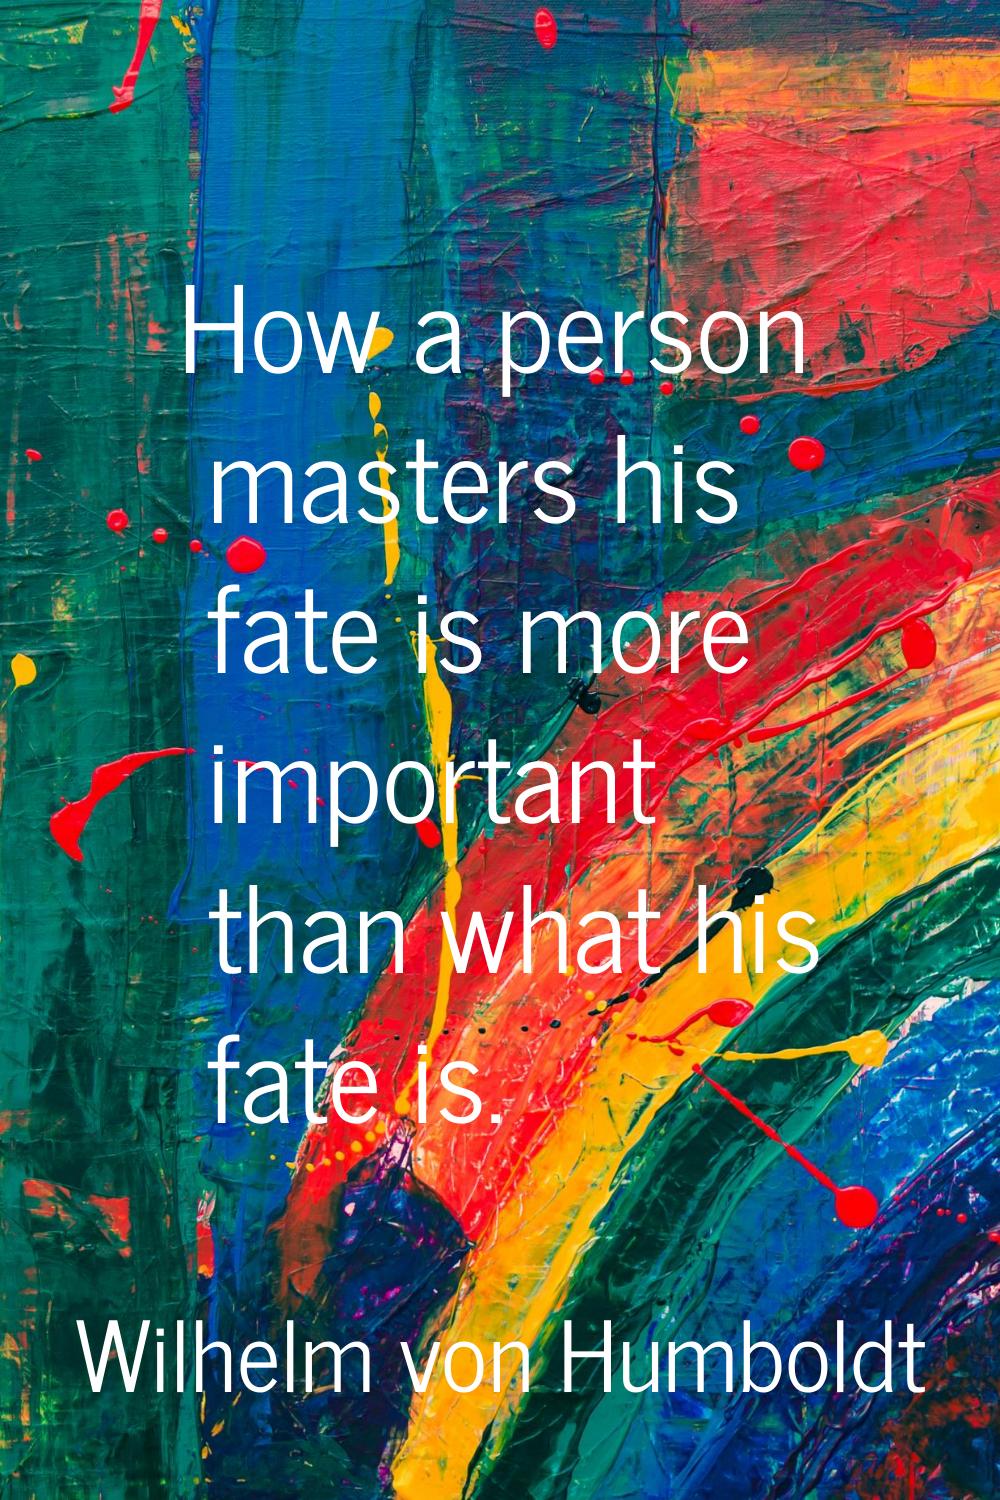 How a person masters his fate is more important than what his fate is.